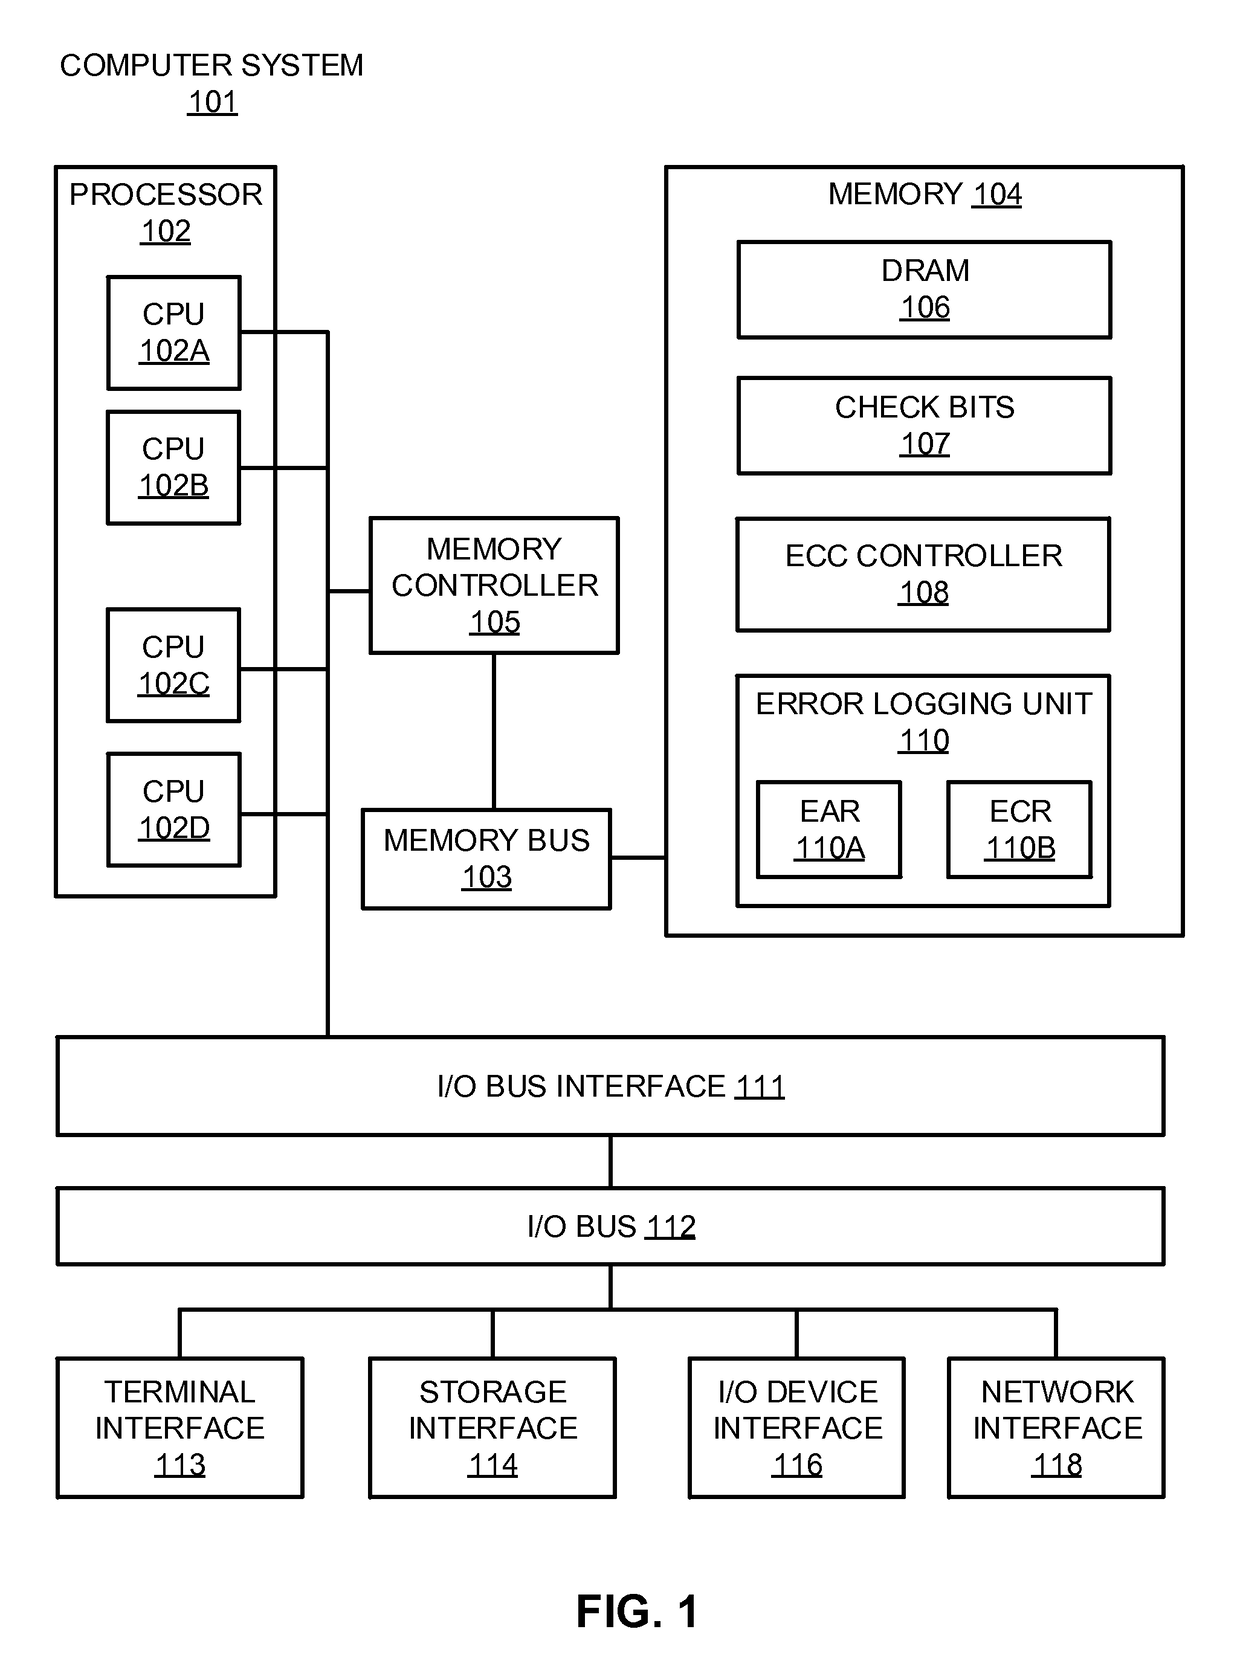 Error monitoring of a memory device containing embedded error correction